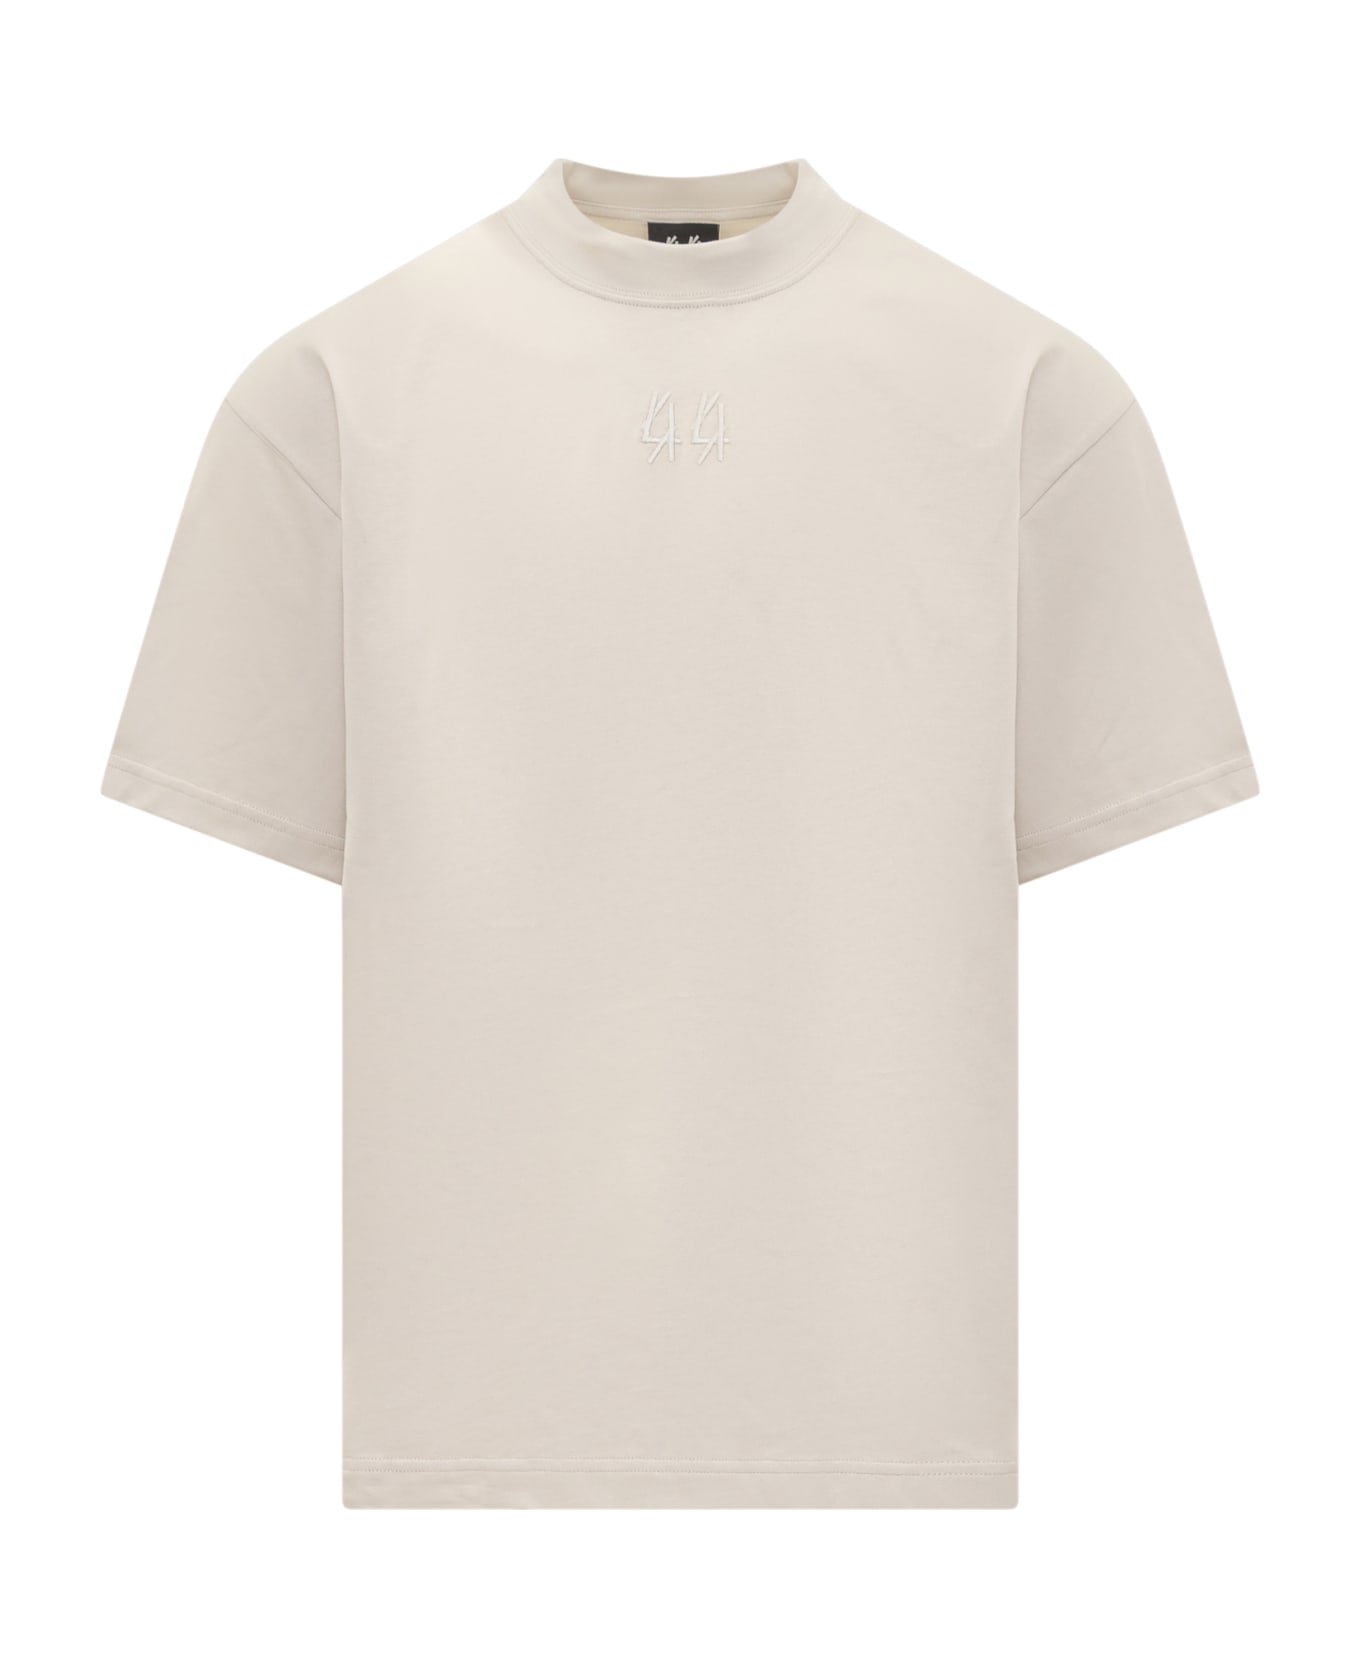 44 Label Group T-shirt With Logo - WHITE